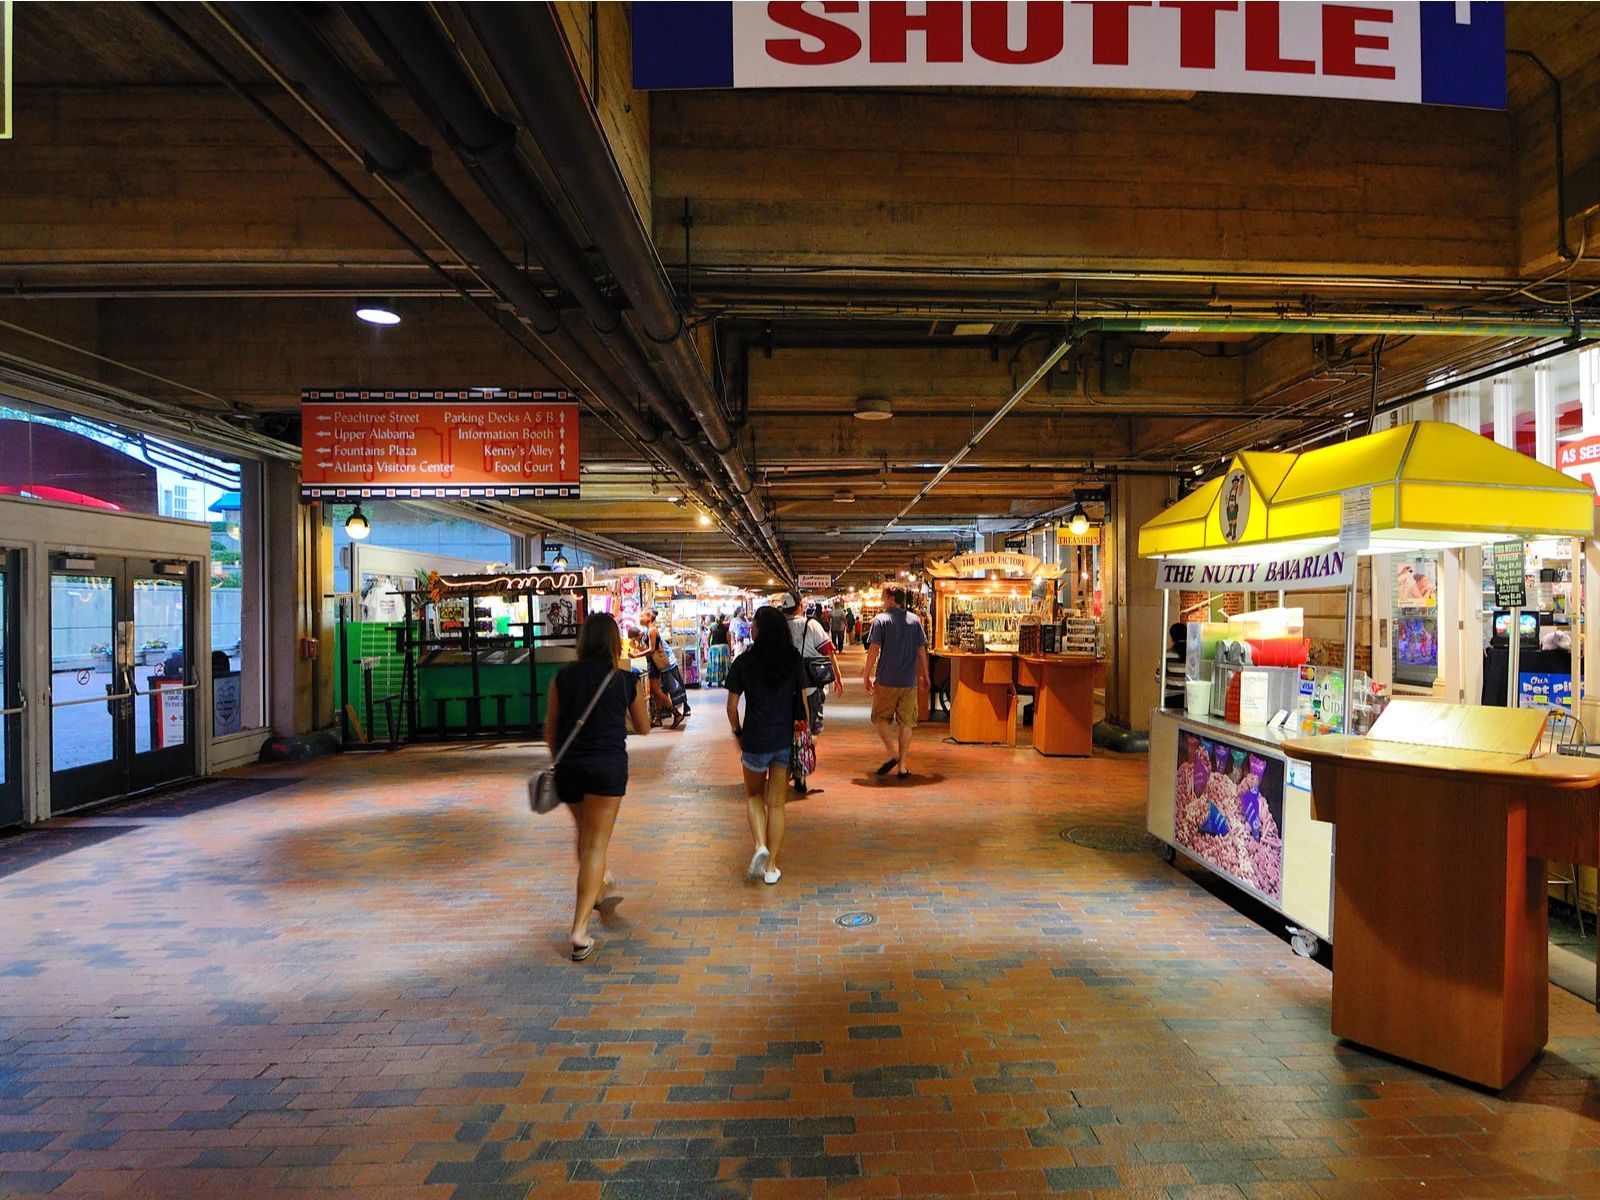 A top pick for the best things to do in Atlanta, the underground shopping plaza